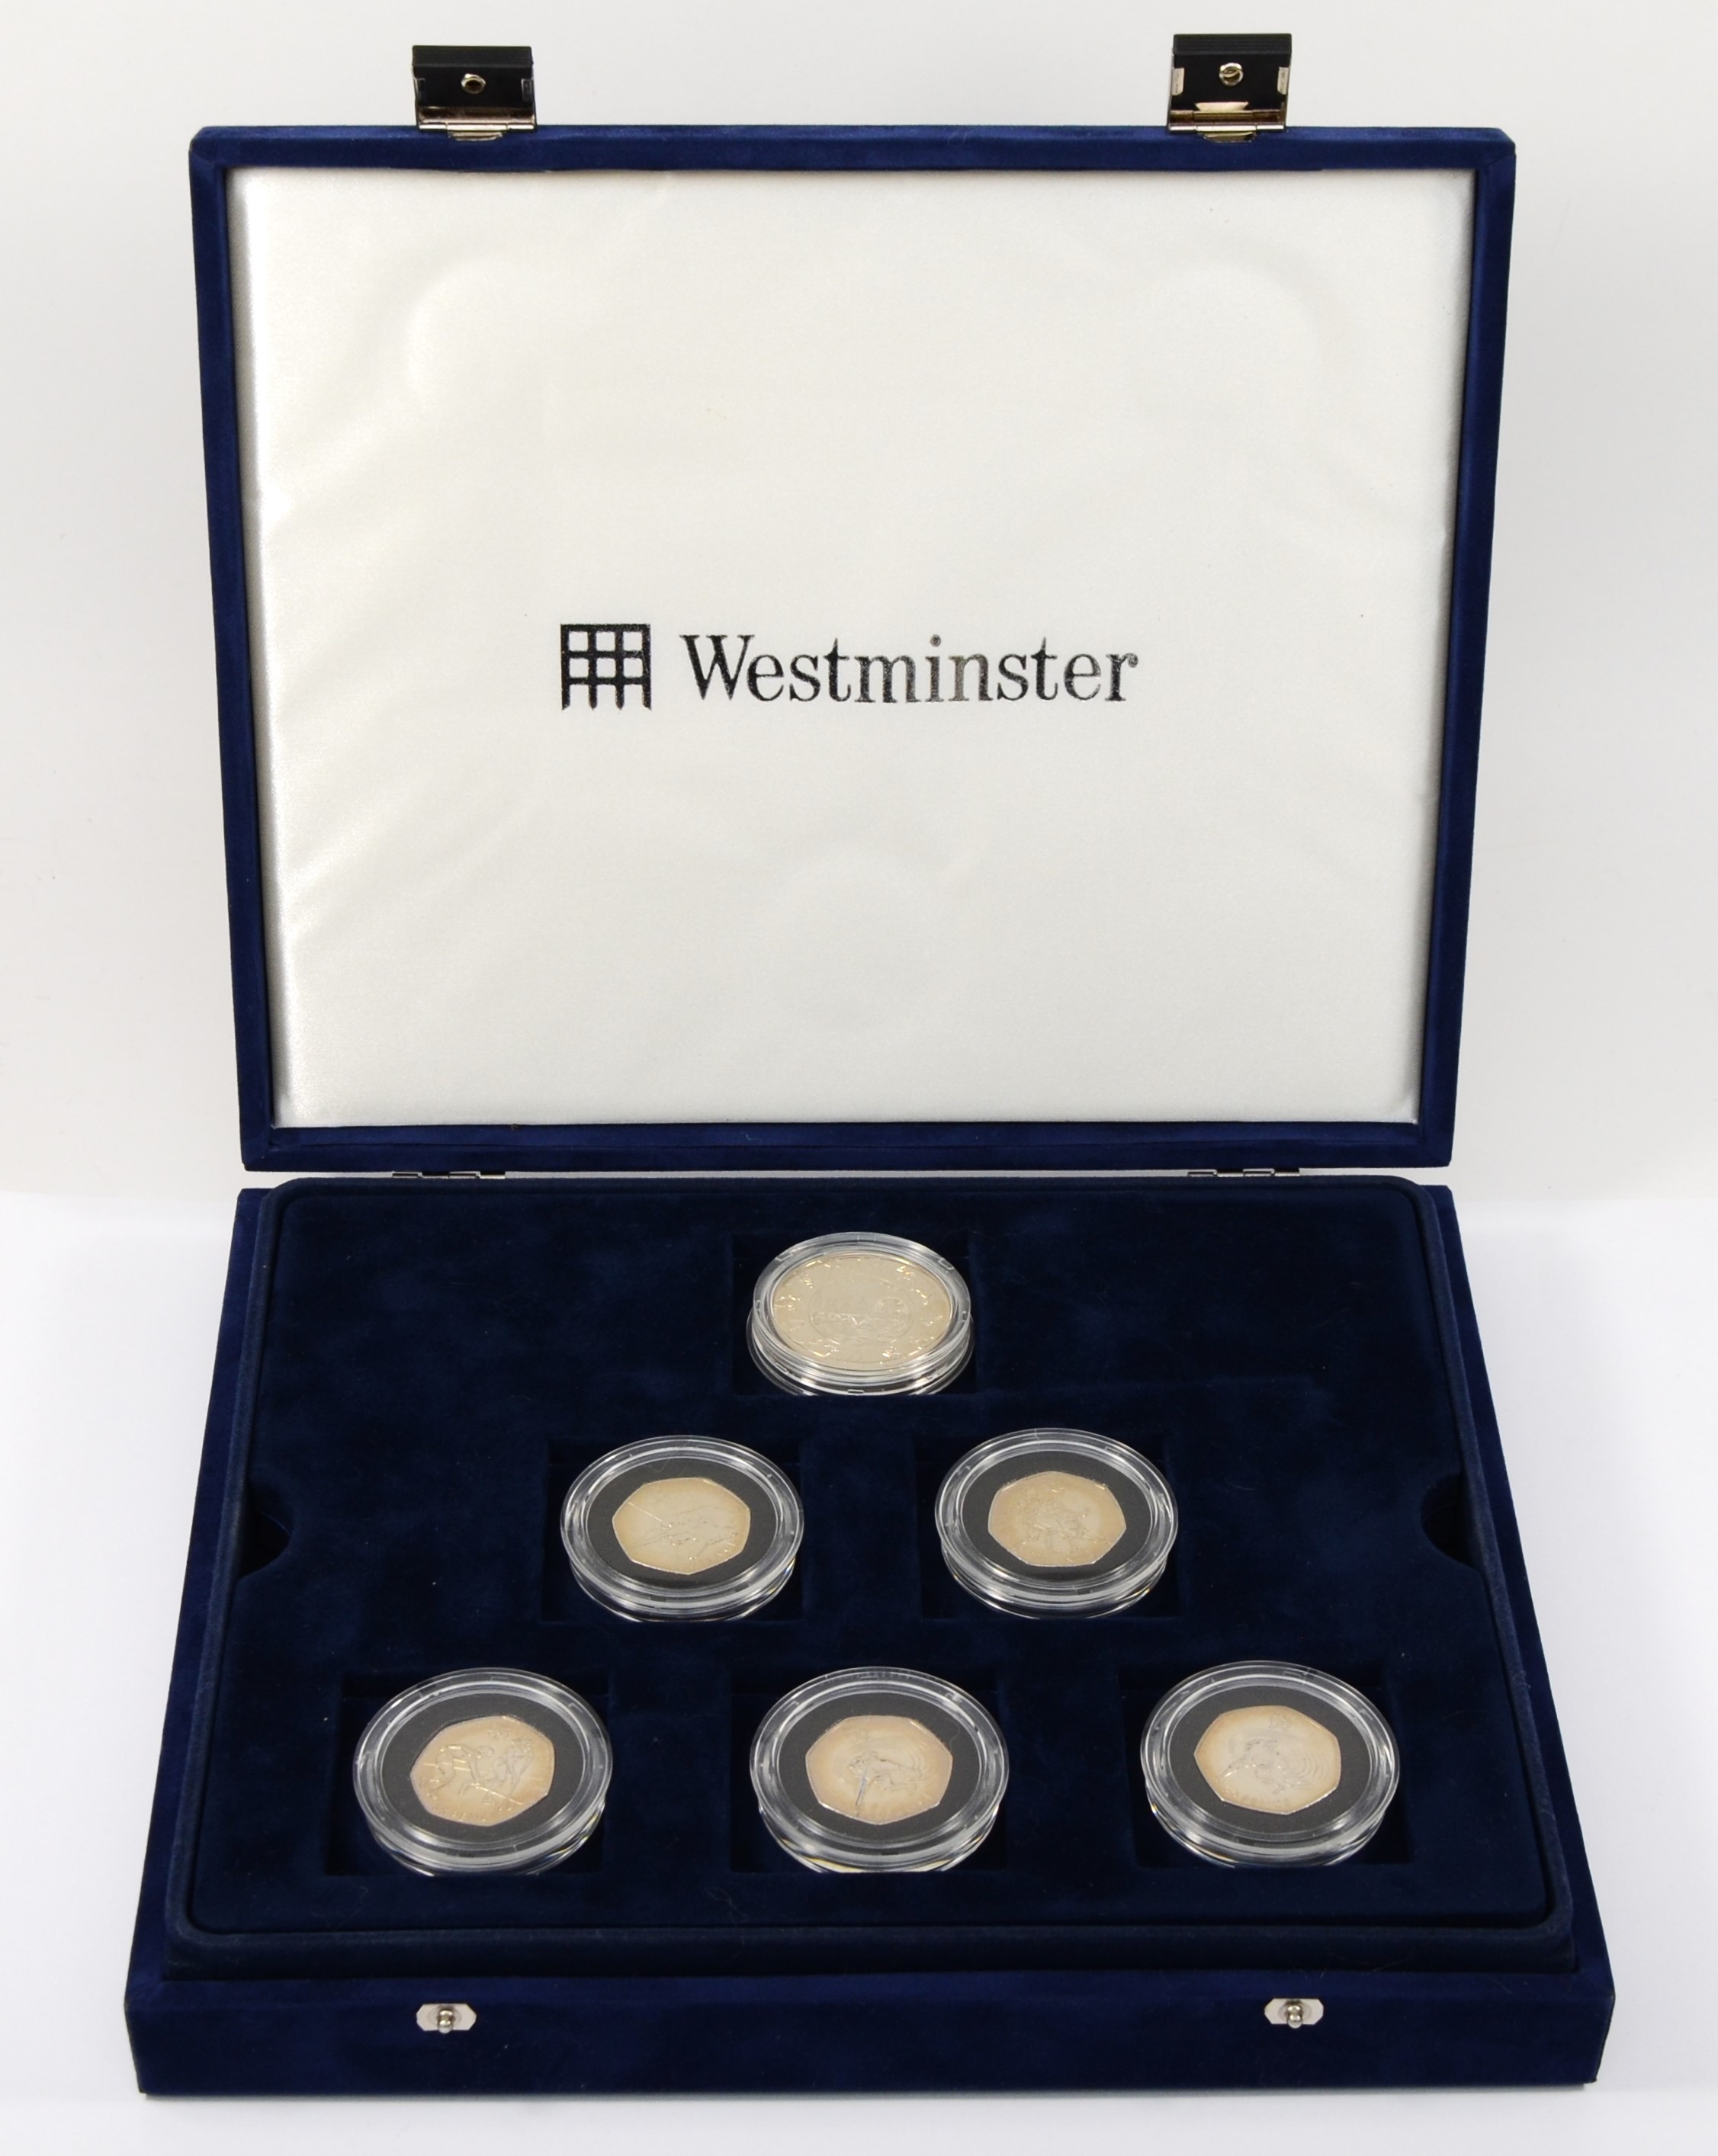 A Westminster London 2012 sports collection silver proof 50p coin set, 29 sterling silver 50p